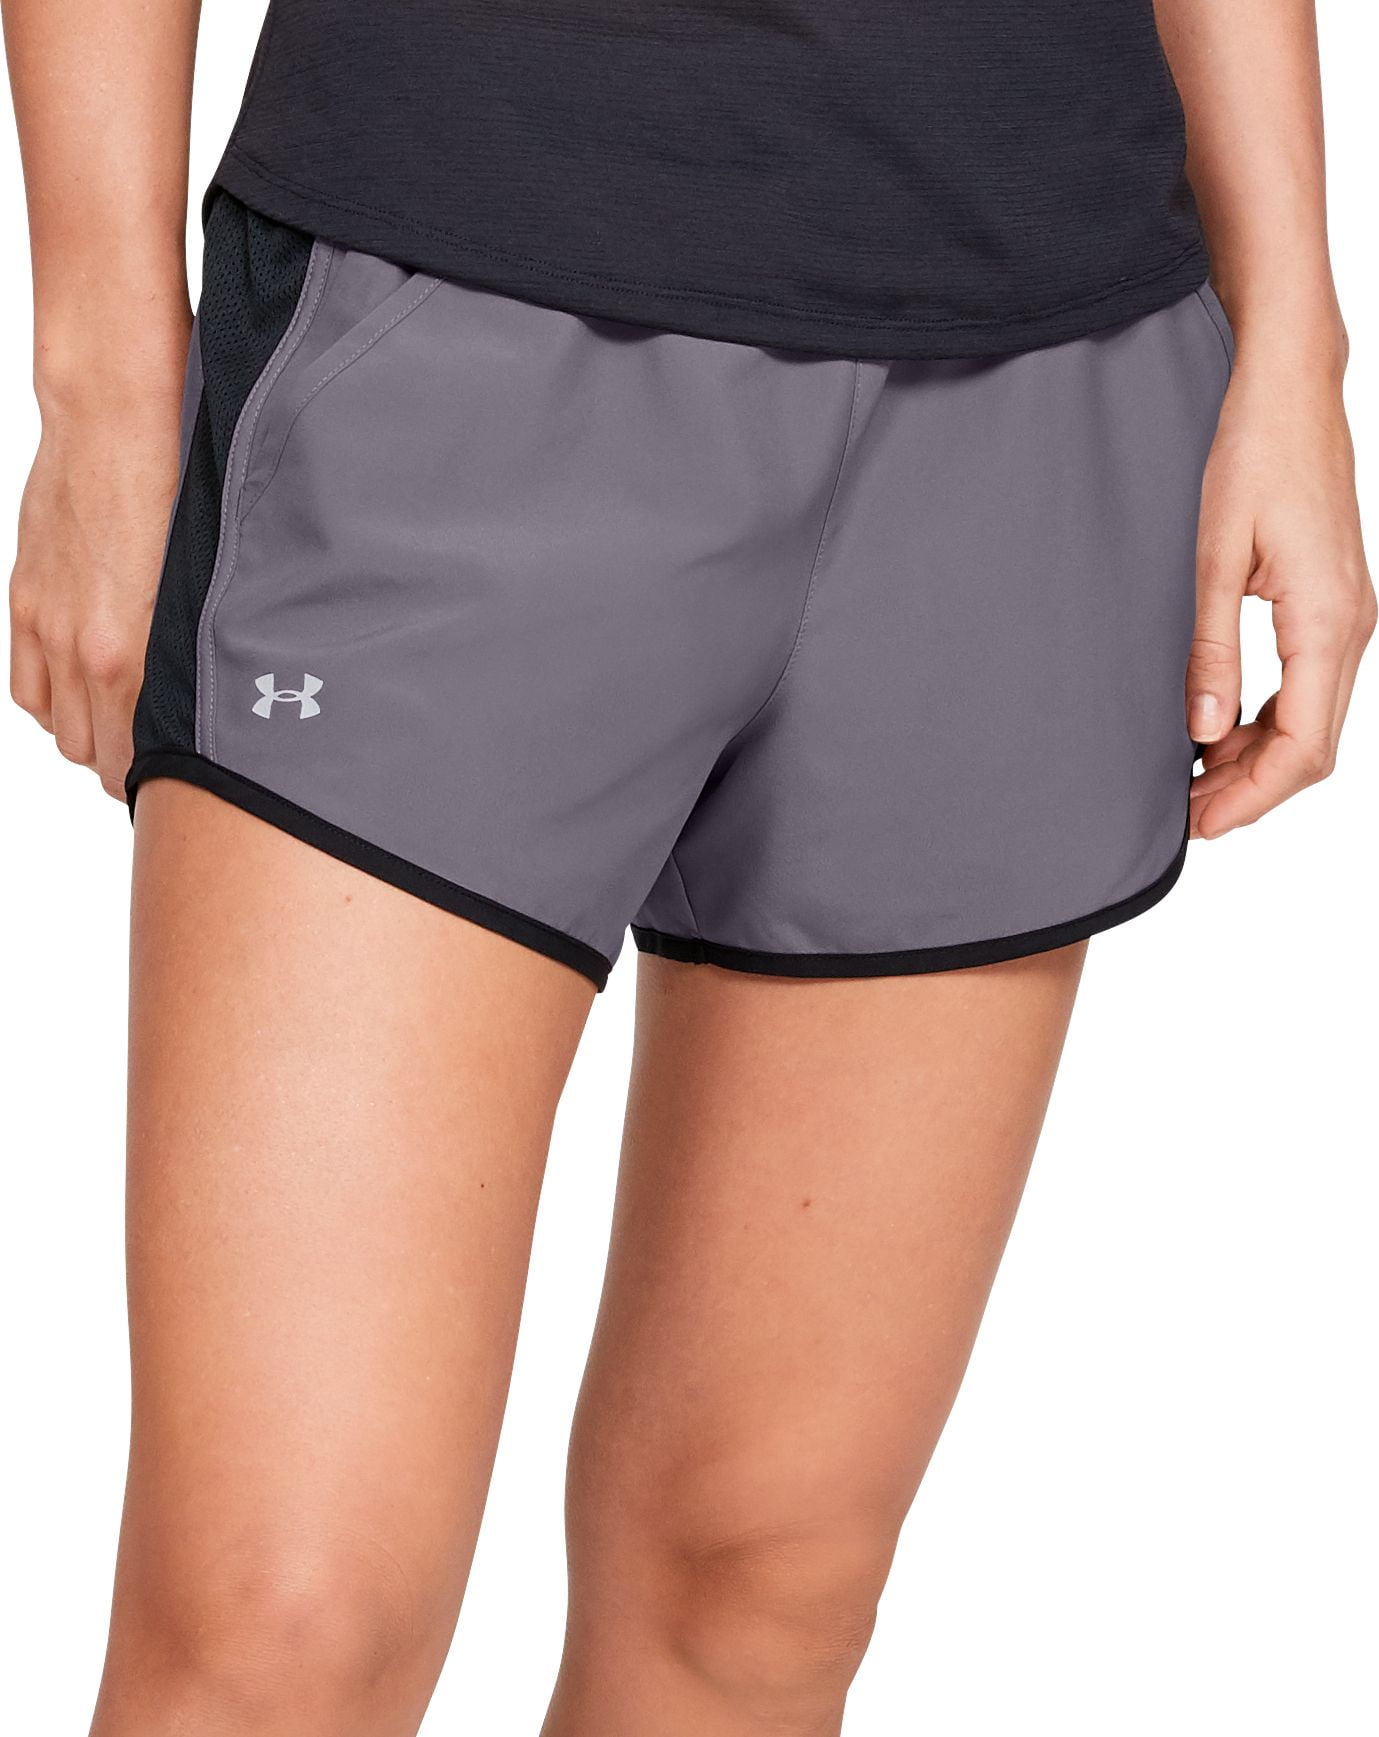 Under Armour Womens Fly By Running Shorts